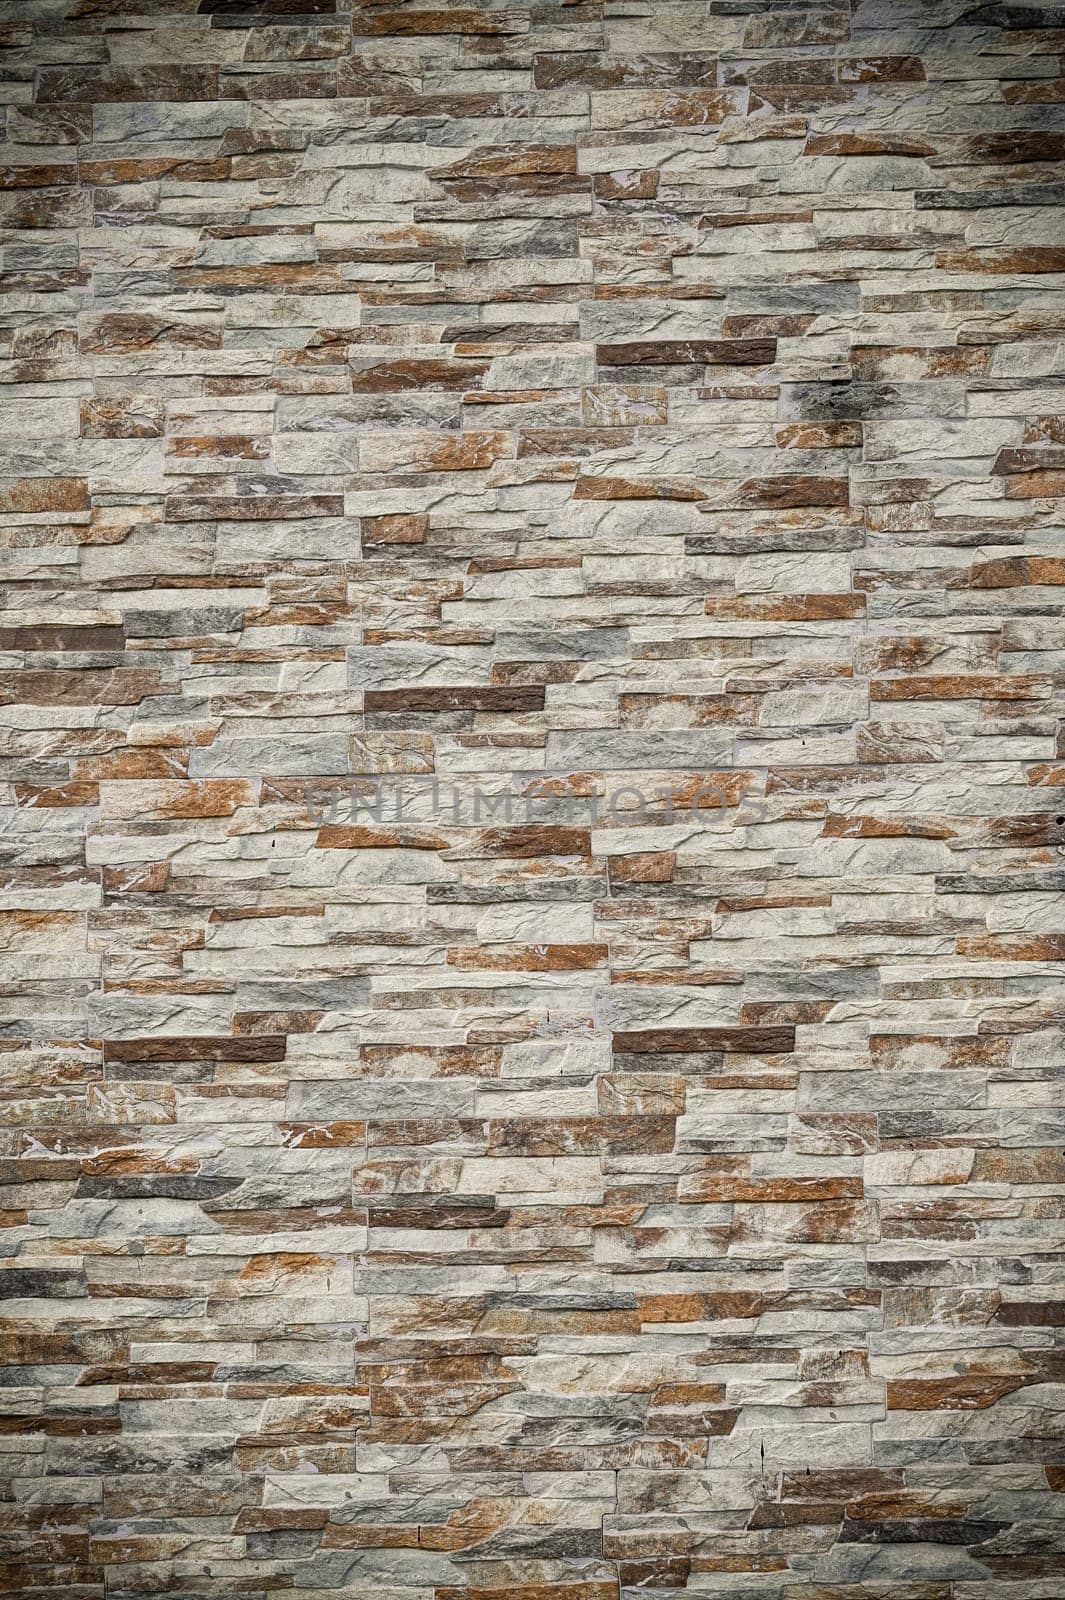 Abstract stone background. The texture of the stone wall. Close-up by Mixa74